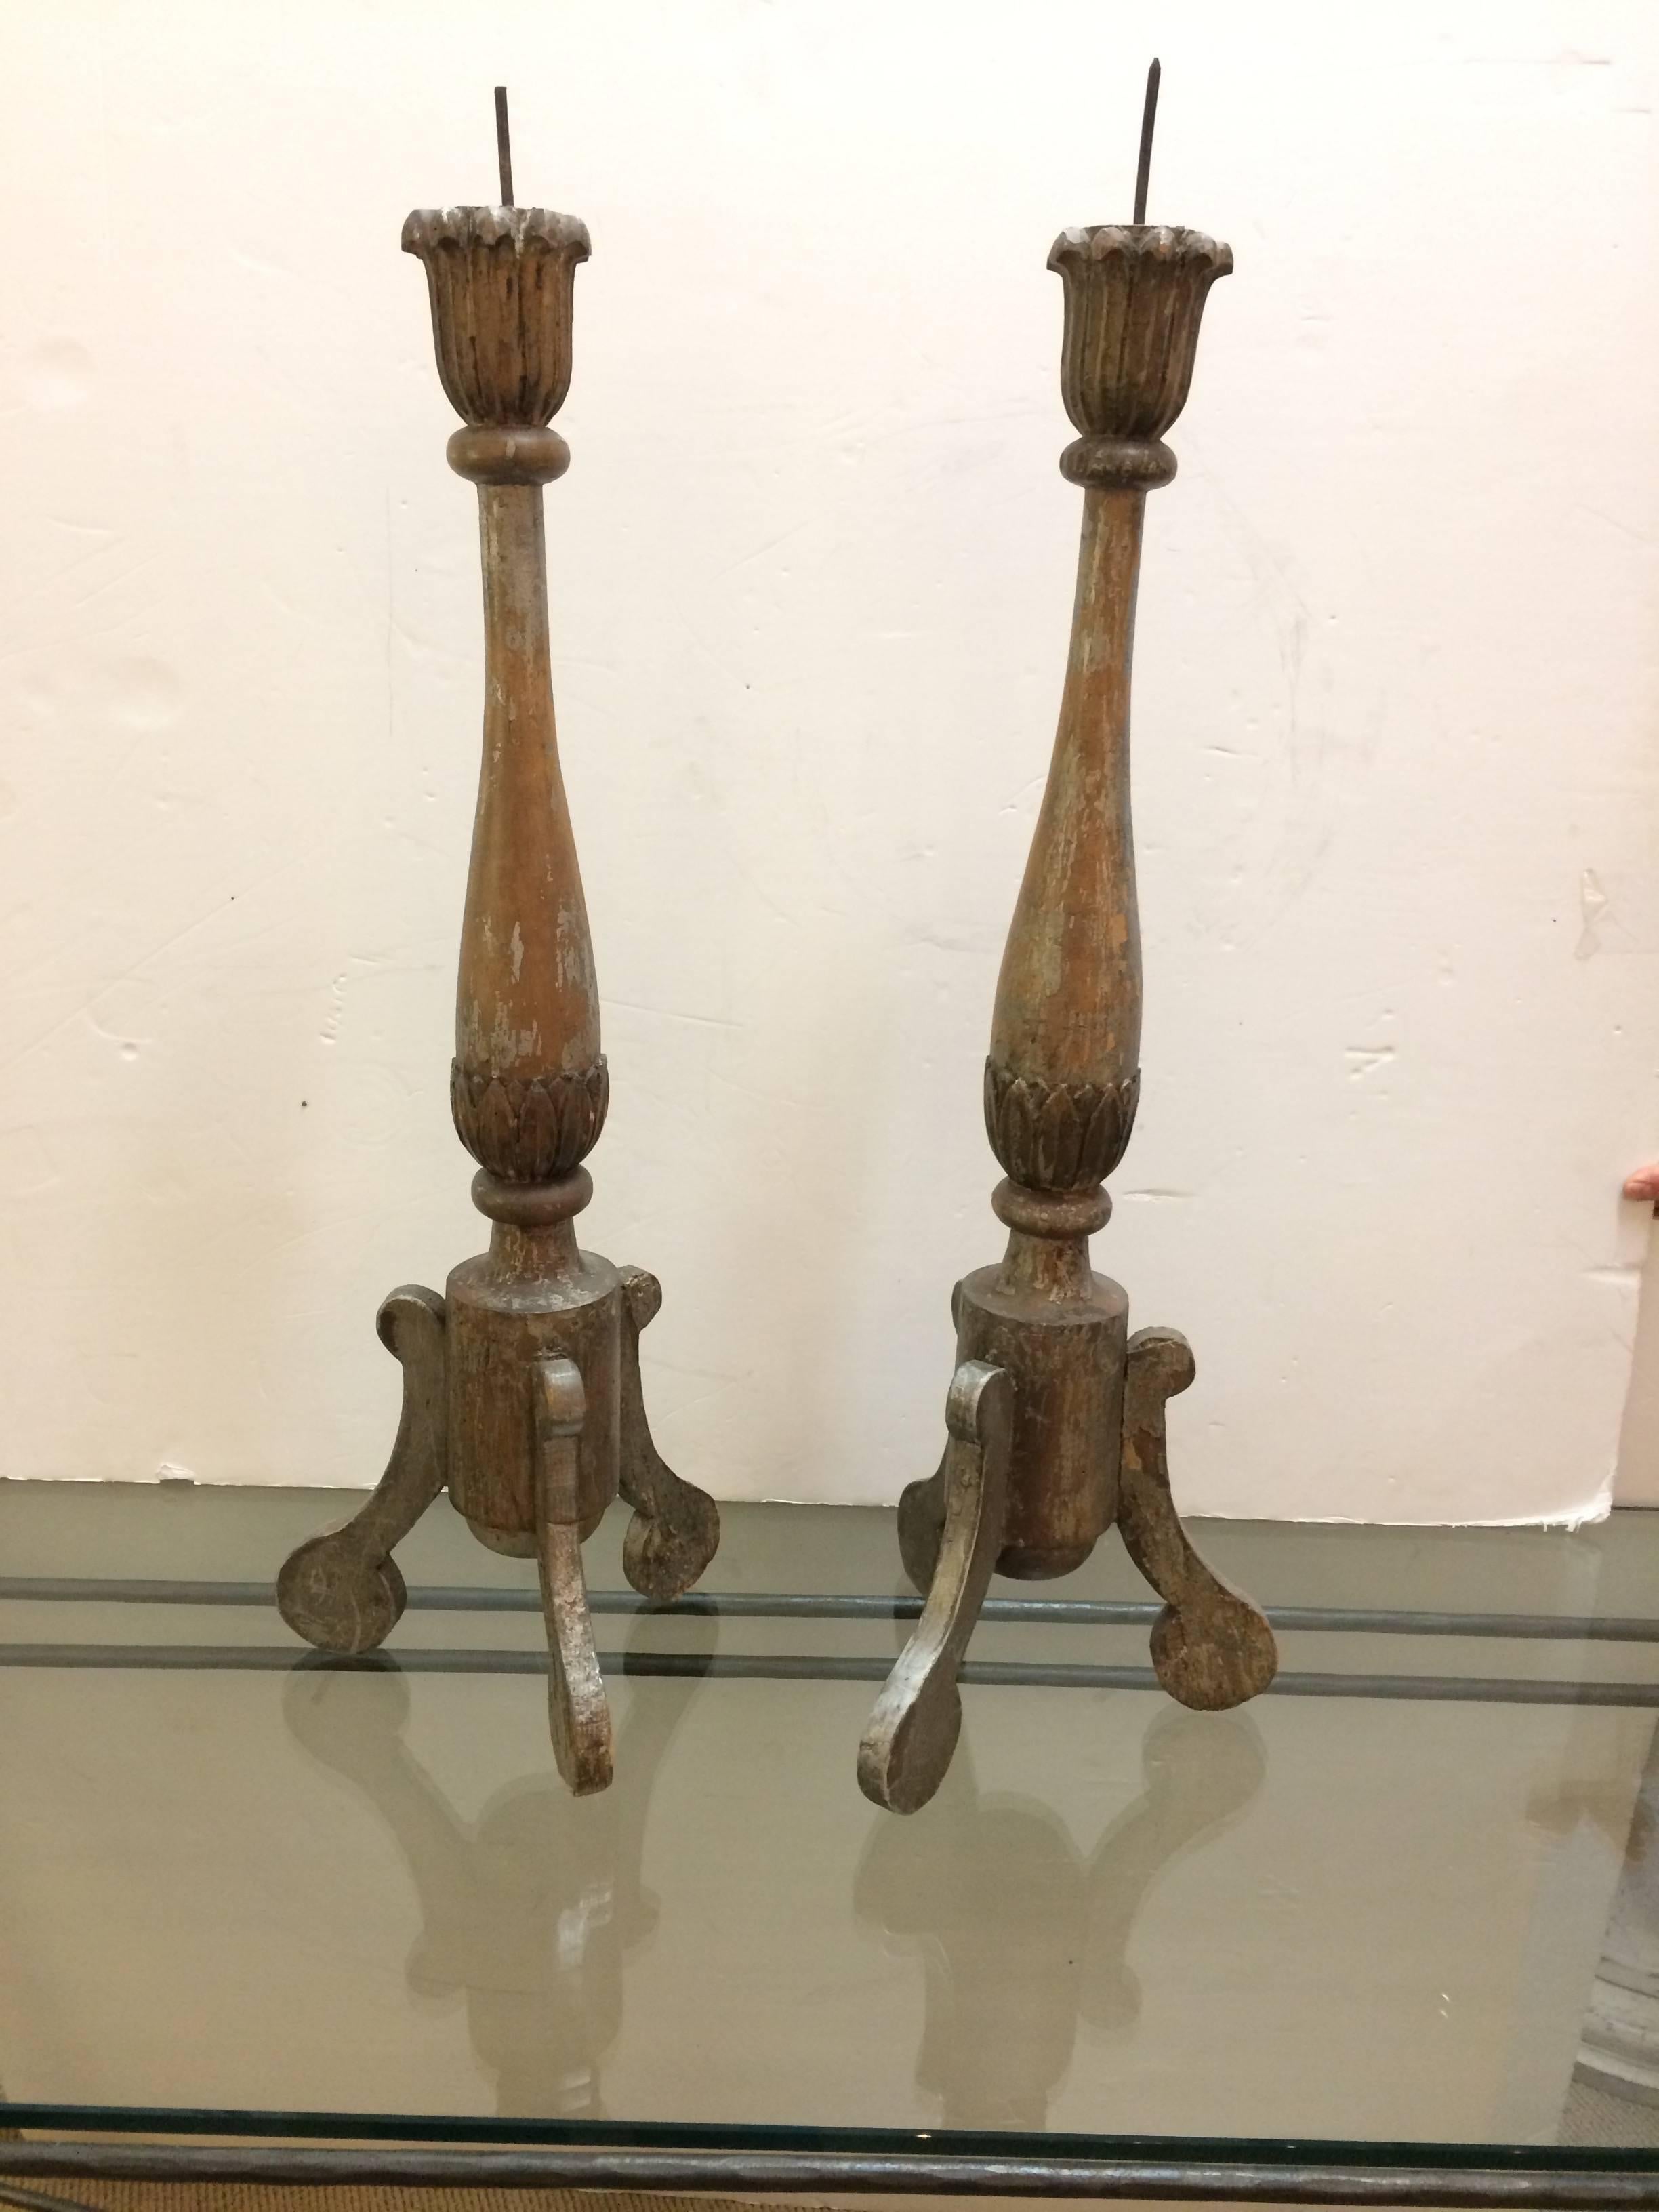 Pair of 19th Century Silverleaf Carved Wood French Pricket Candlesticks For Sale 4